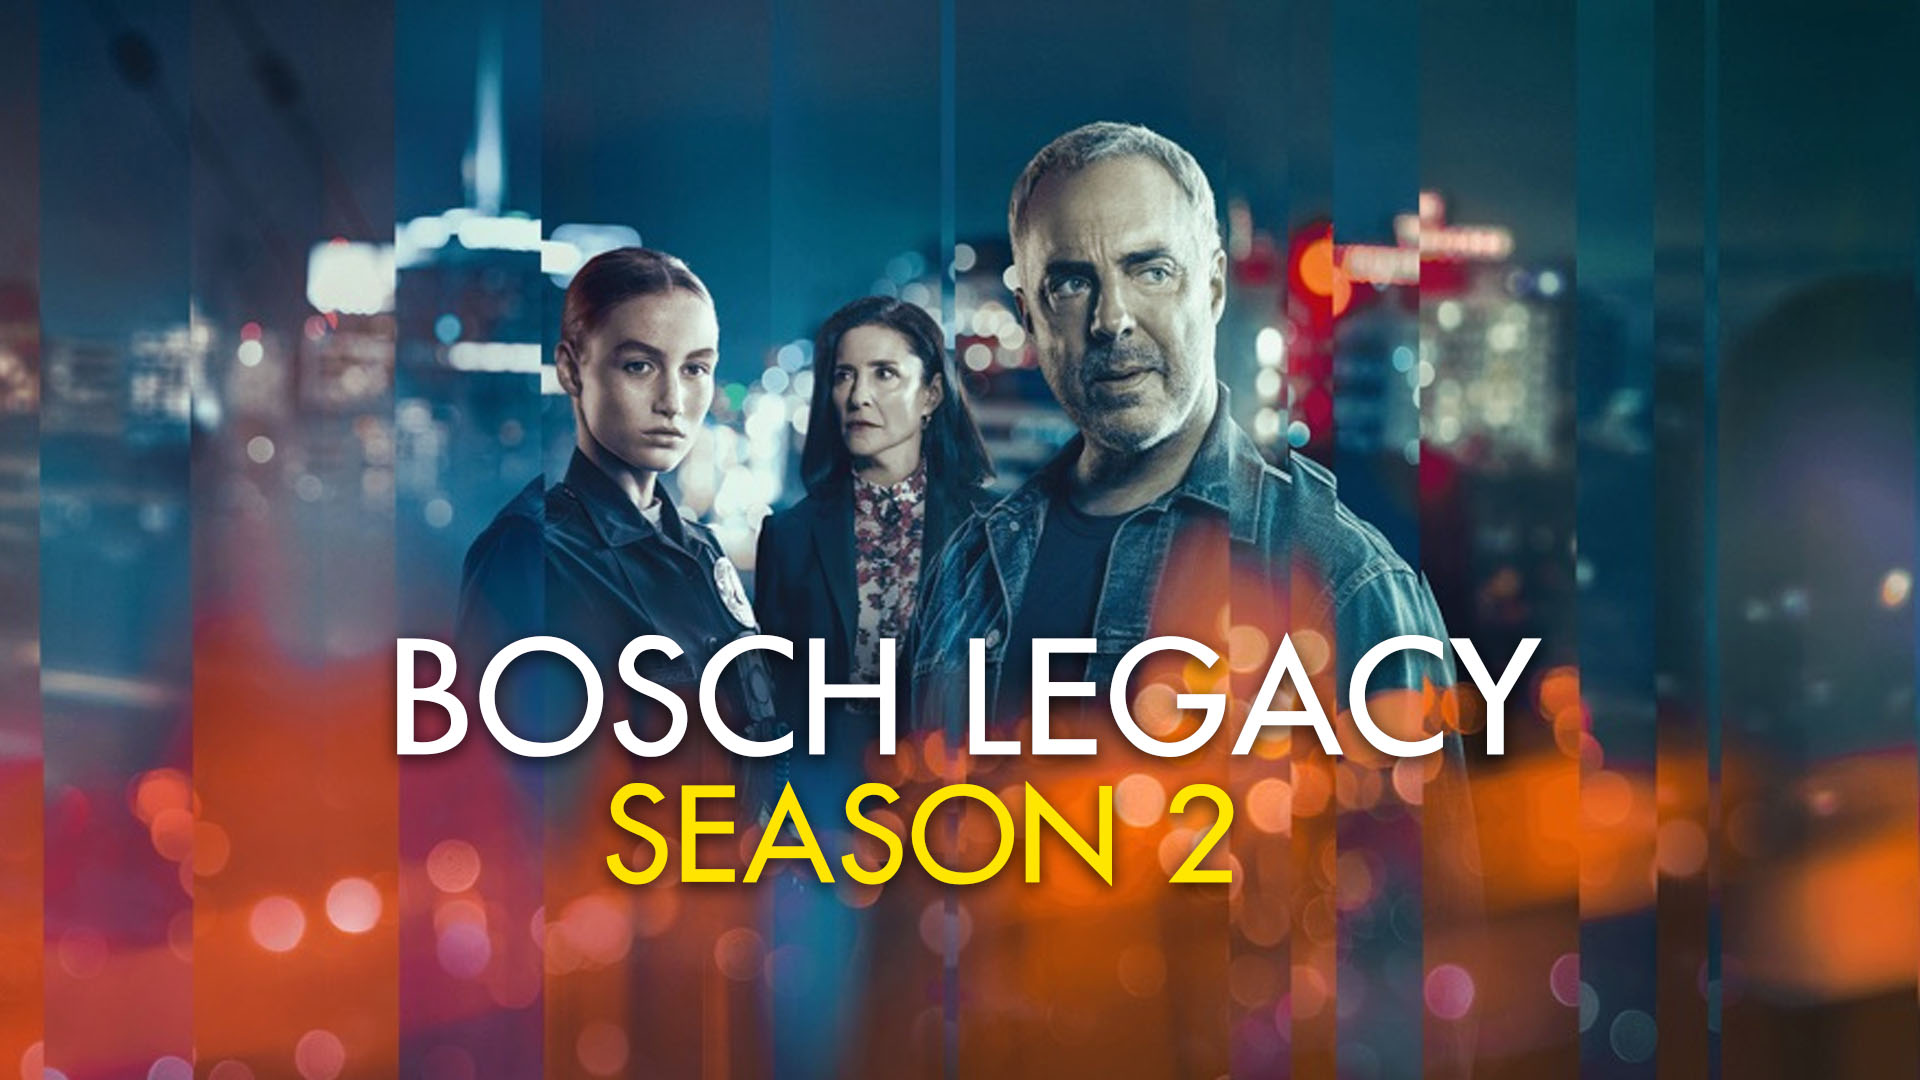 Bosch Legacy Season 2 Premiere Every Detail you need to know about